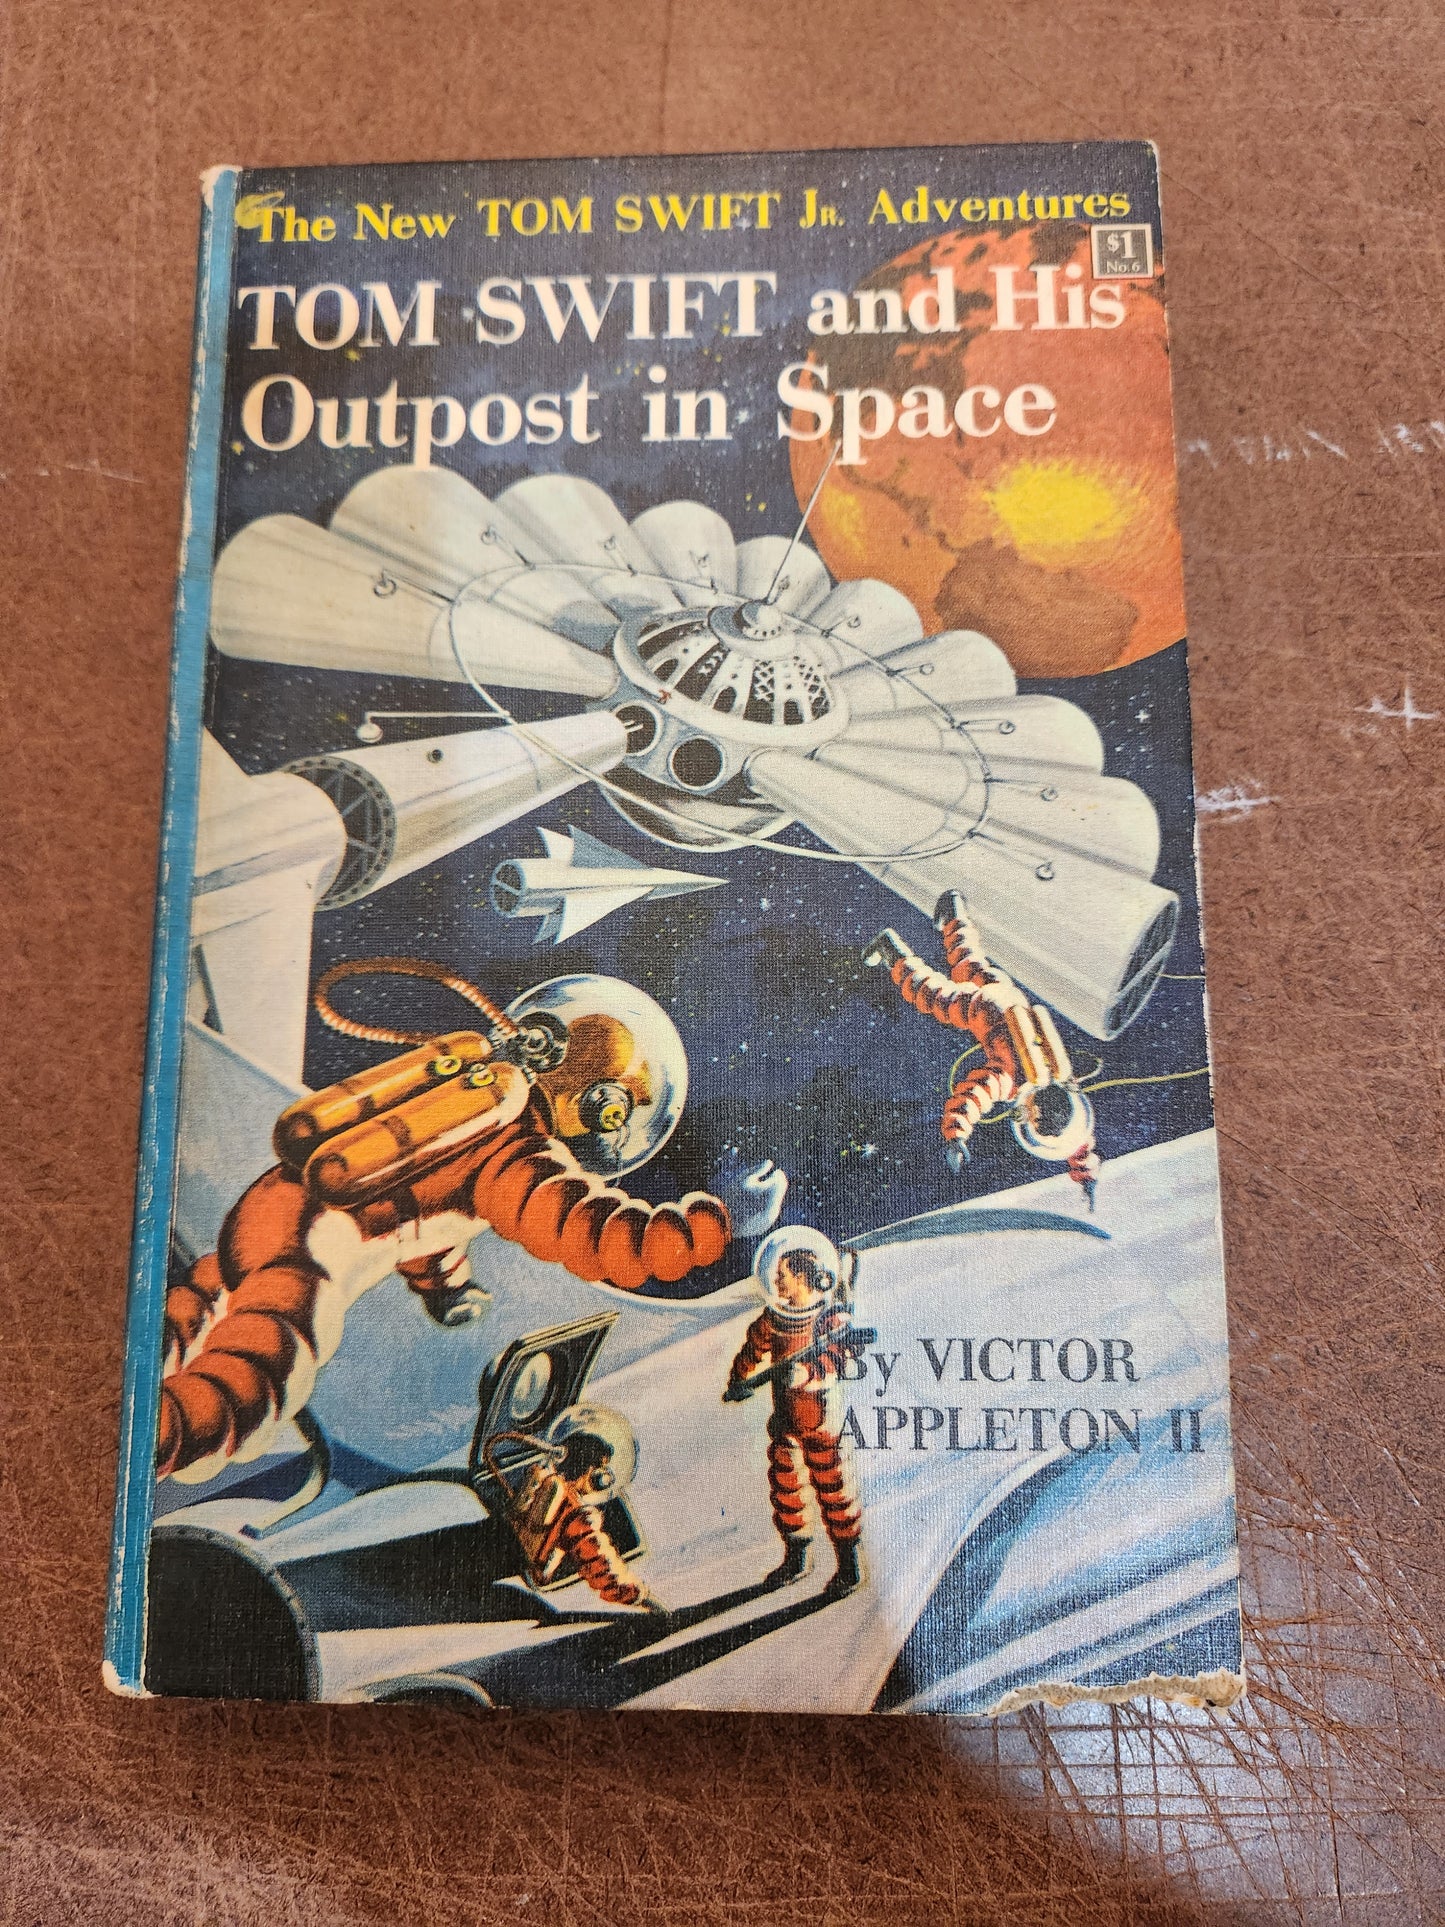 "Tom Swift and His Outpost in Space" by Victor Appleton II (Blue Spine)